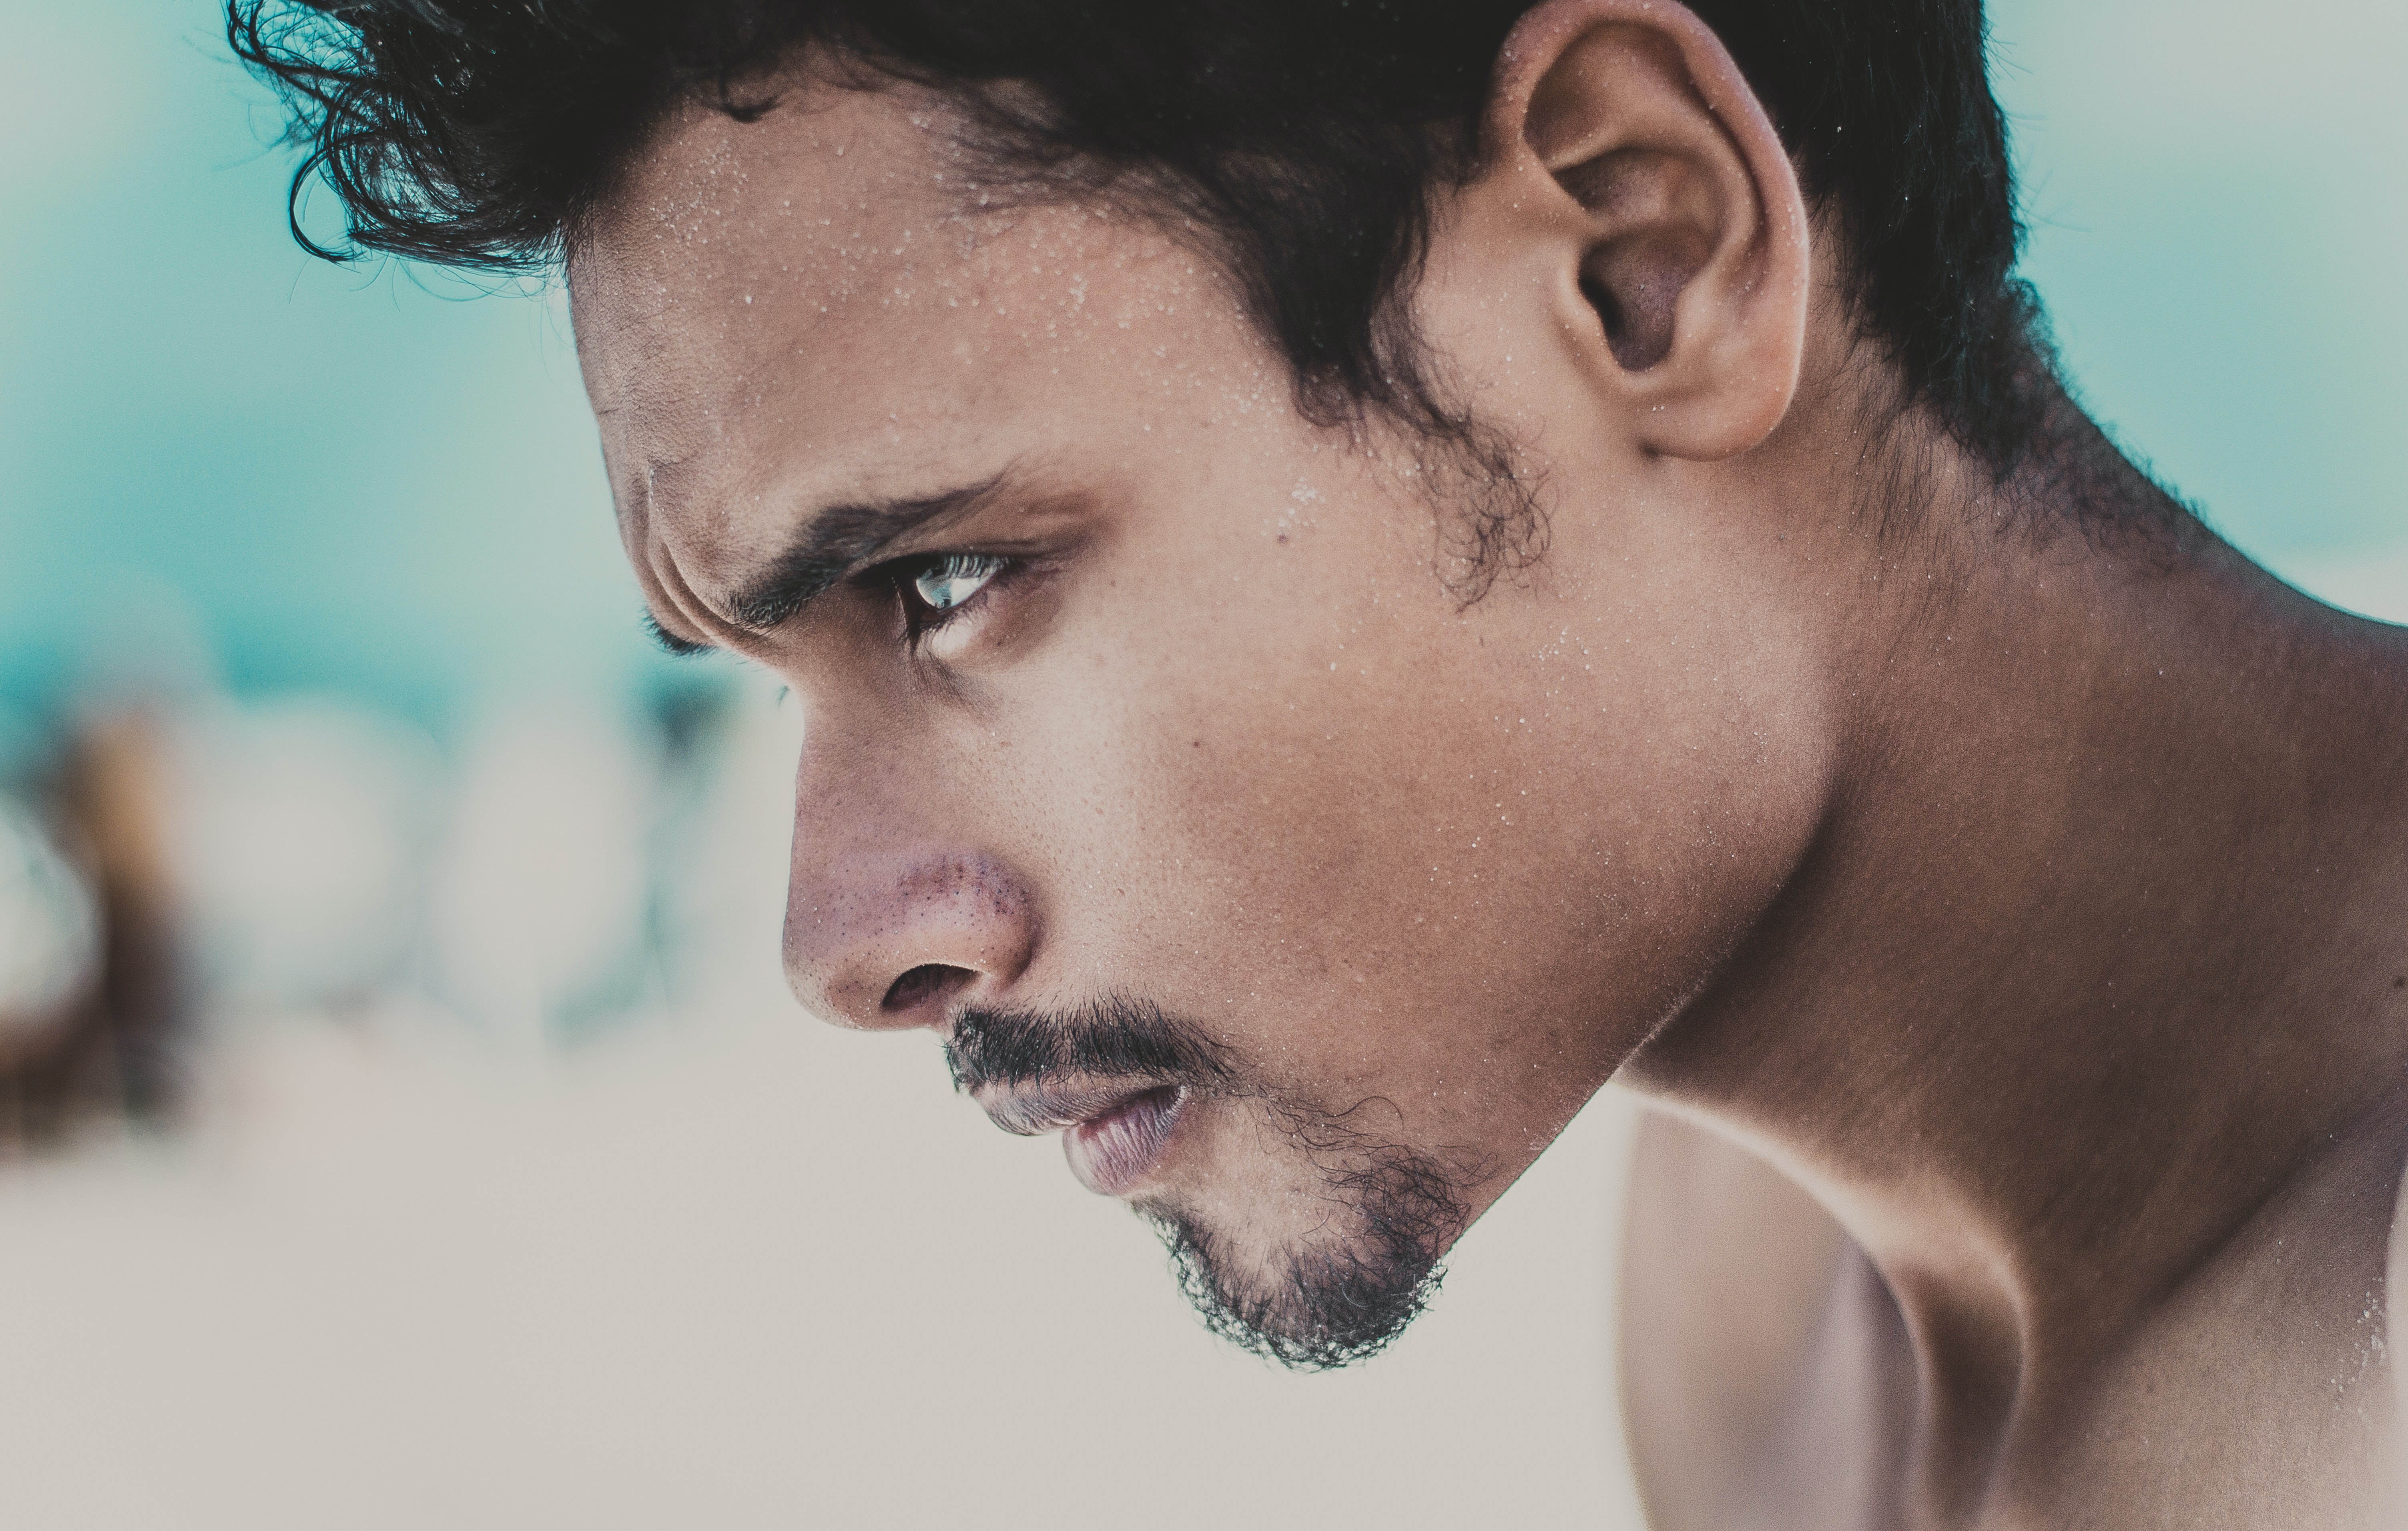 An angry man. | Source: Pexels